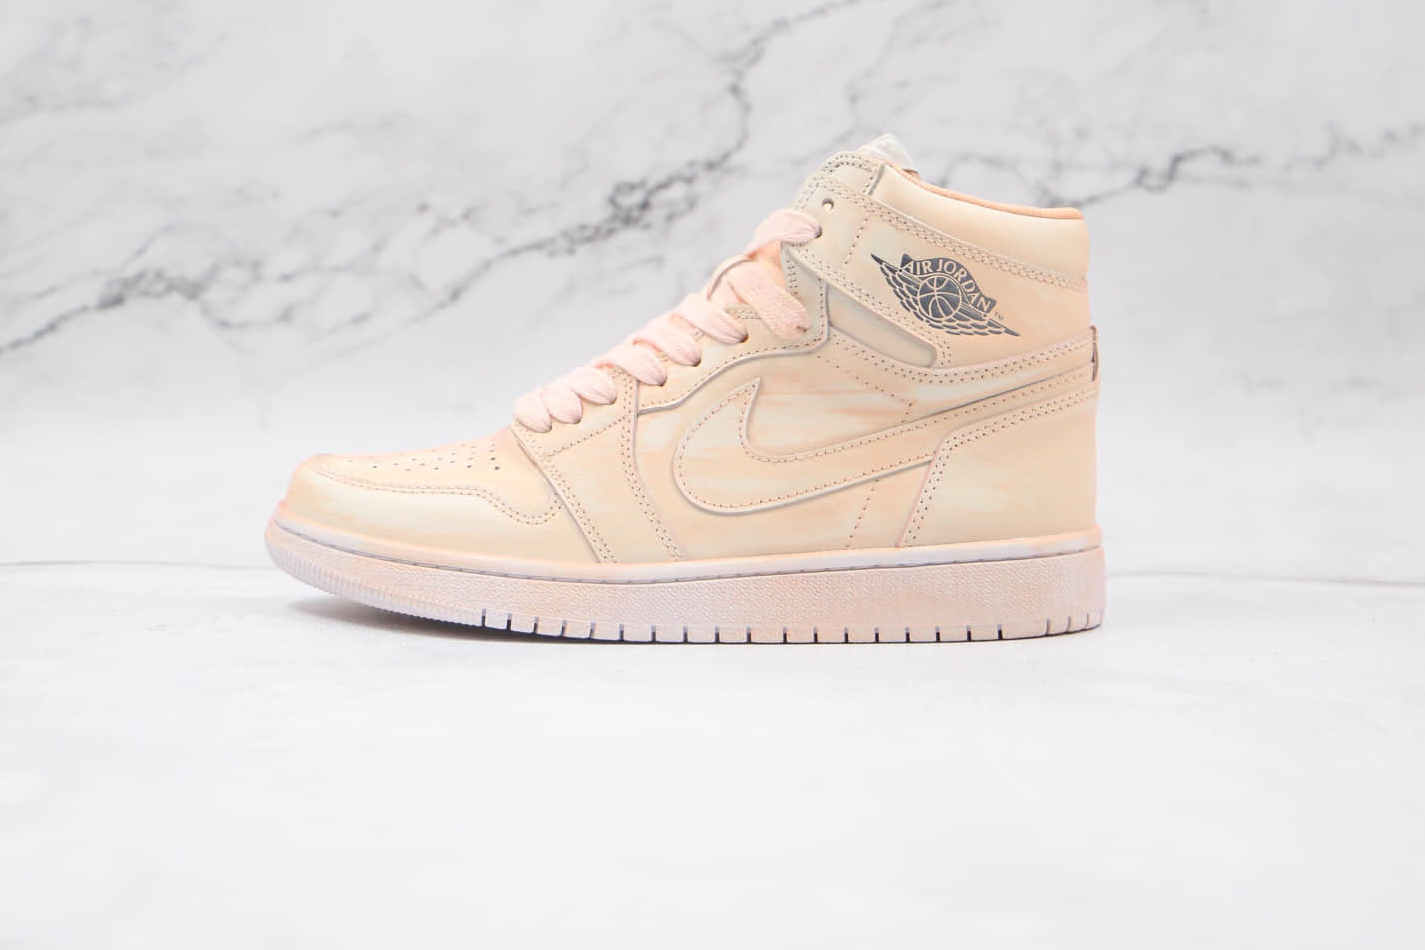 Air Jordan 1 Retro High OG Guava Ice 555088-801 | Limited Edition Sneakers